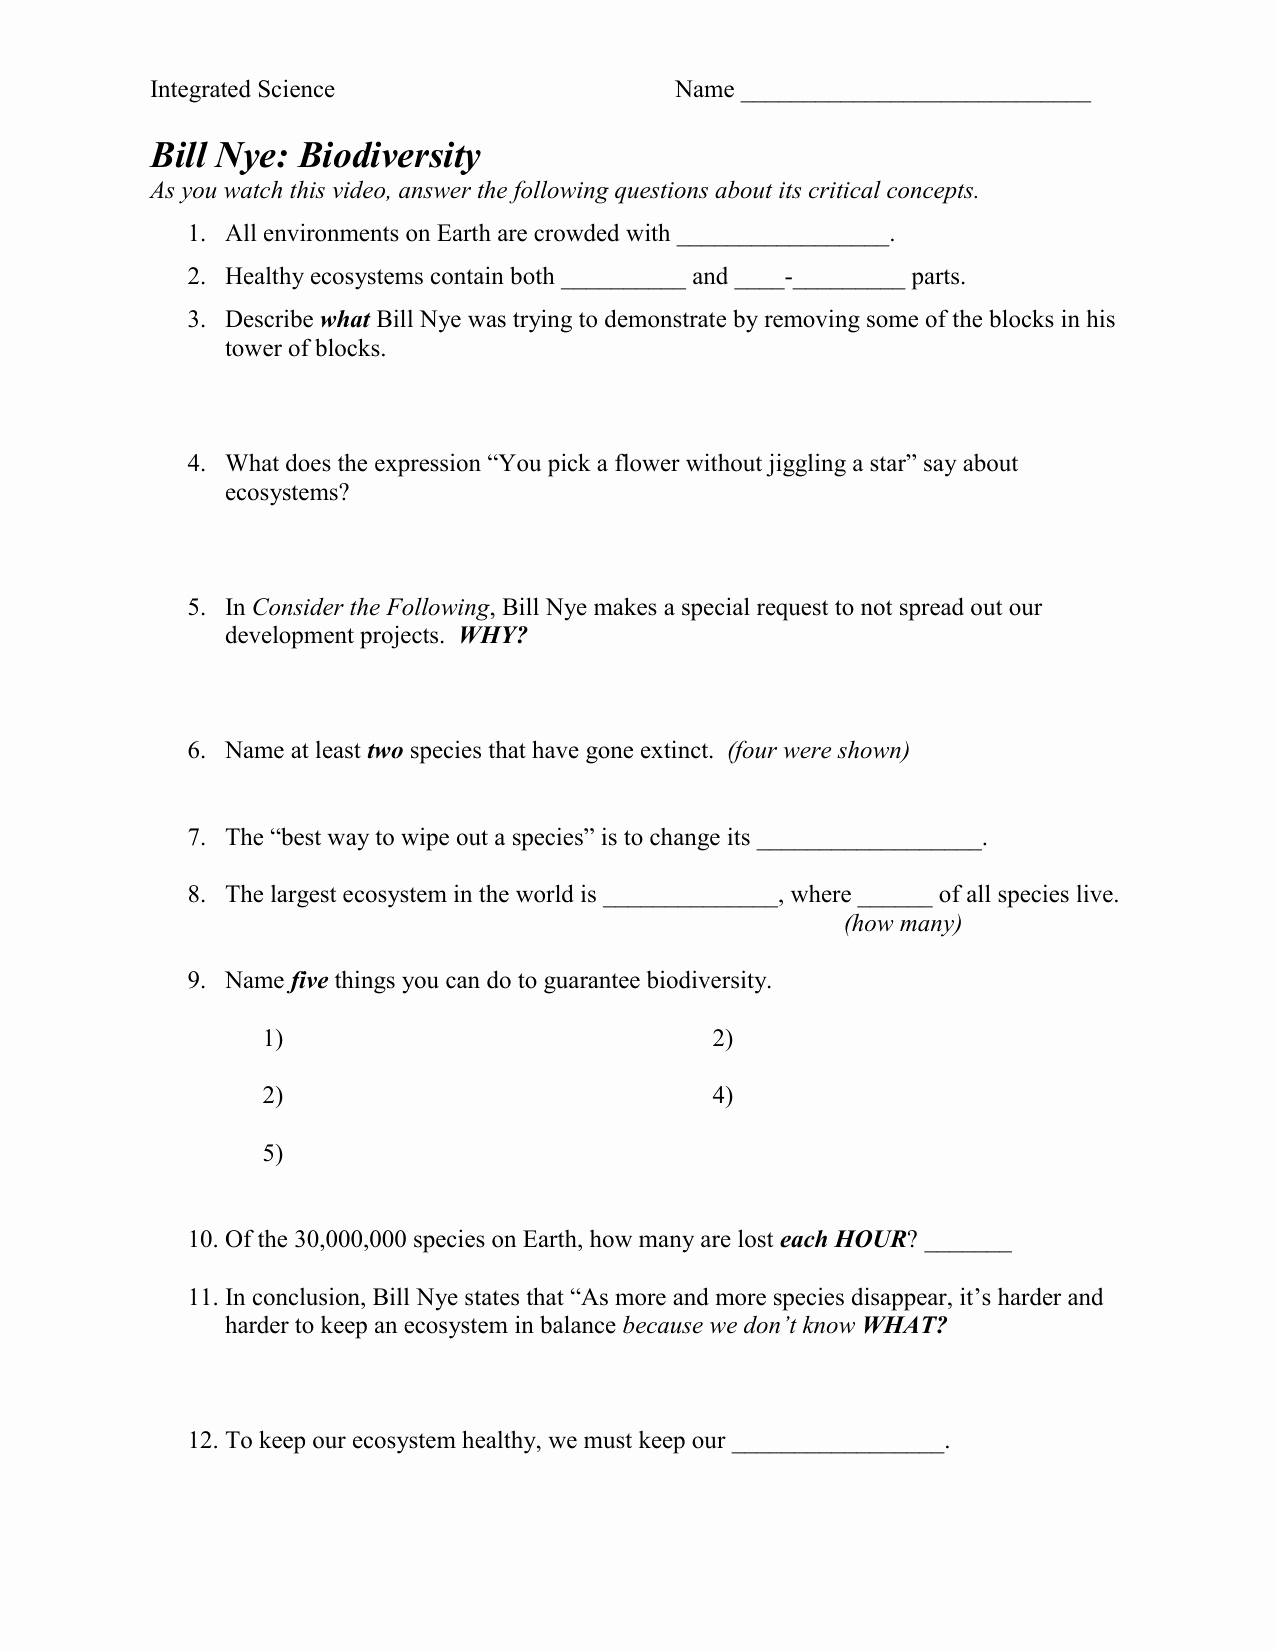 Bill Nye Biodiversity Worksheet Answers Awesome Tuesdays with Morrie Worksheets